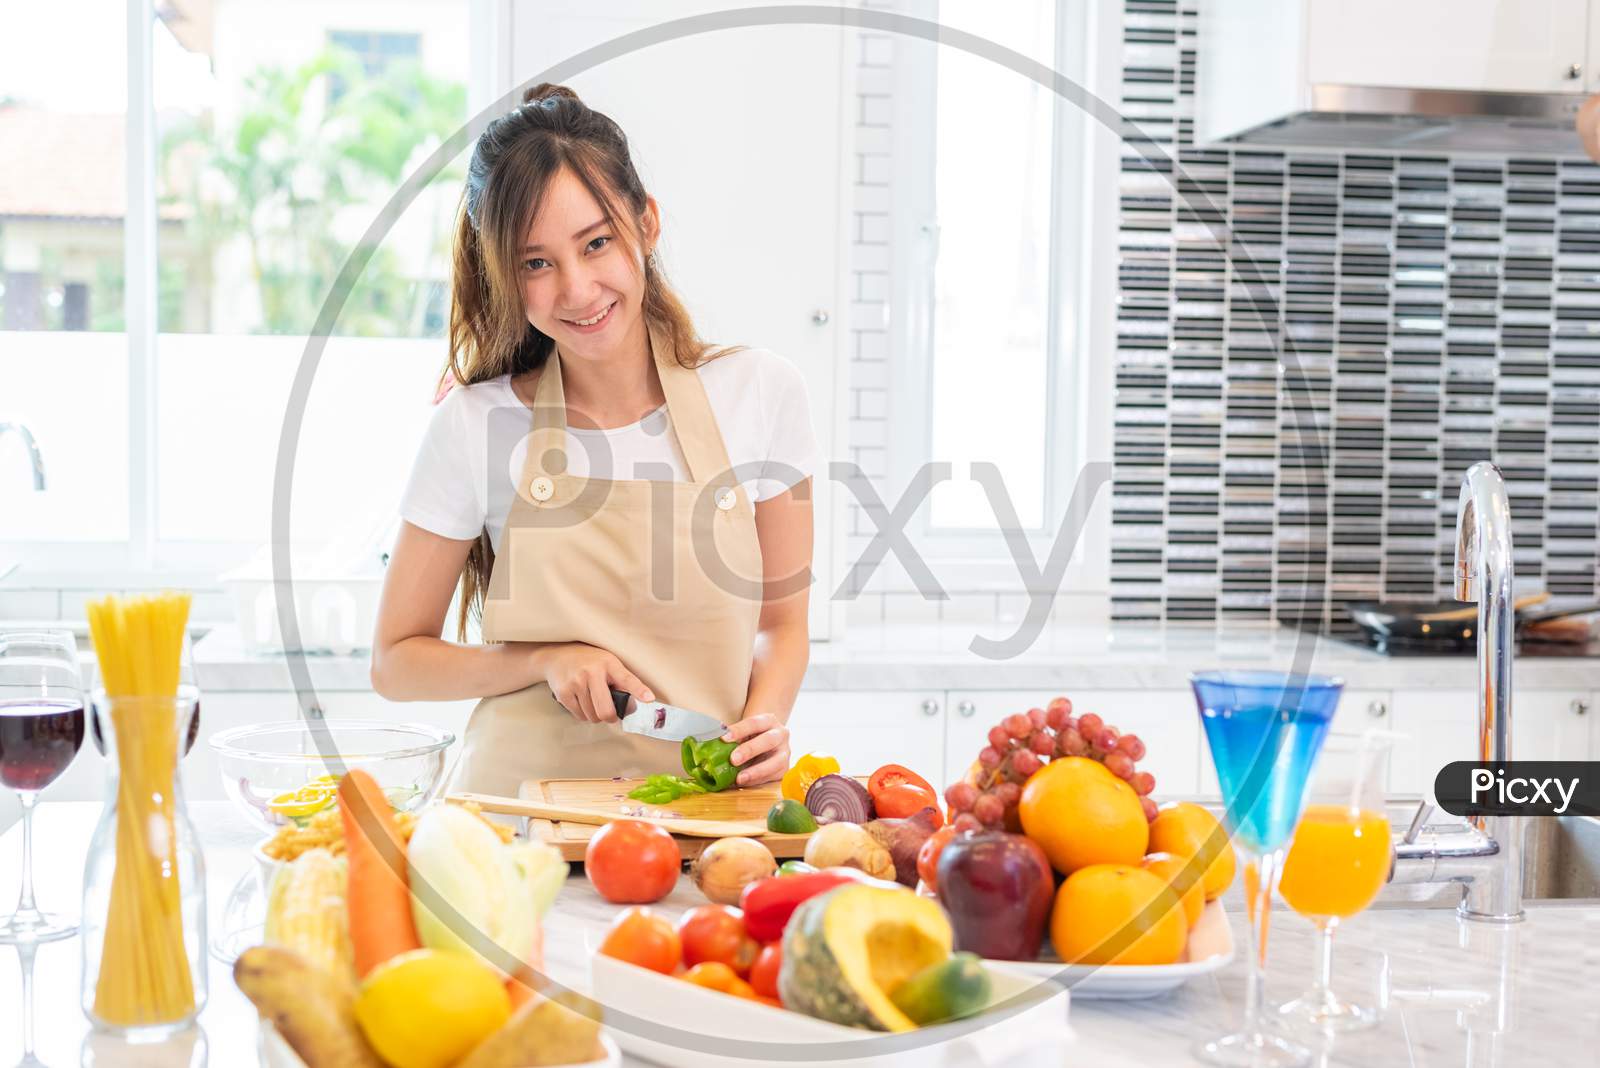 Asian Beauty Woman Cooking And Slicing Vegetable In Kitchen Room With Full Of Food And Fruit On Table For Party. Holiday And Happiness Concept. People And Lifestyles Concept. Girl Looking At Camera